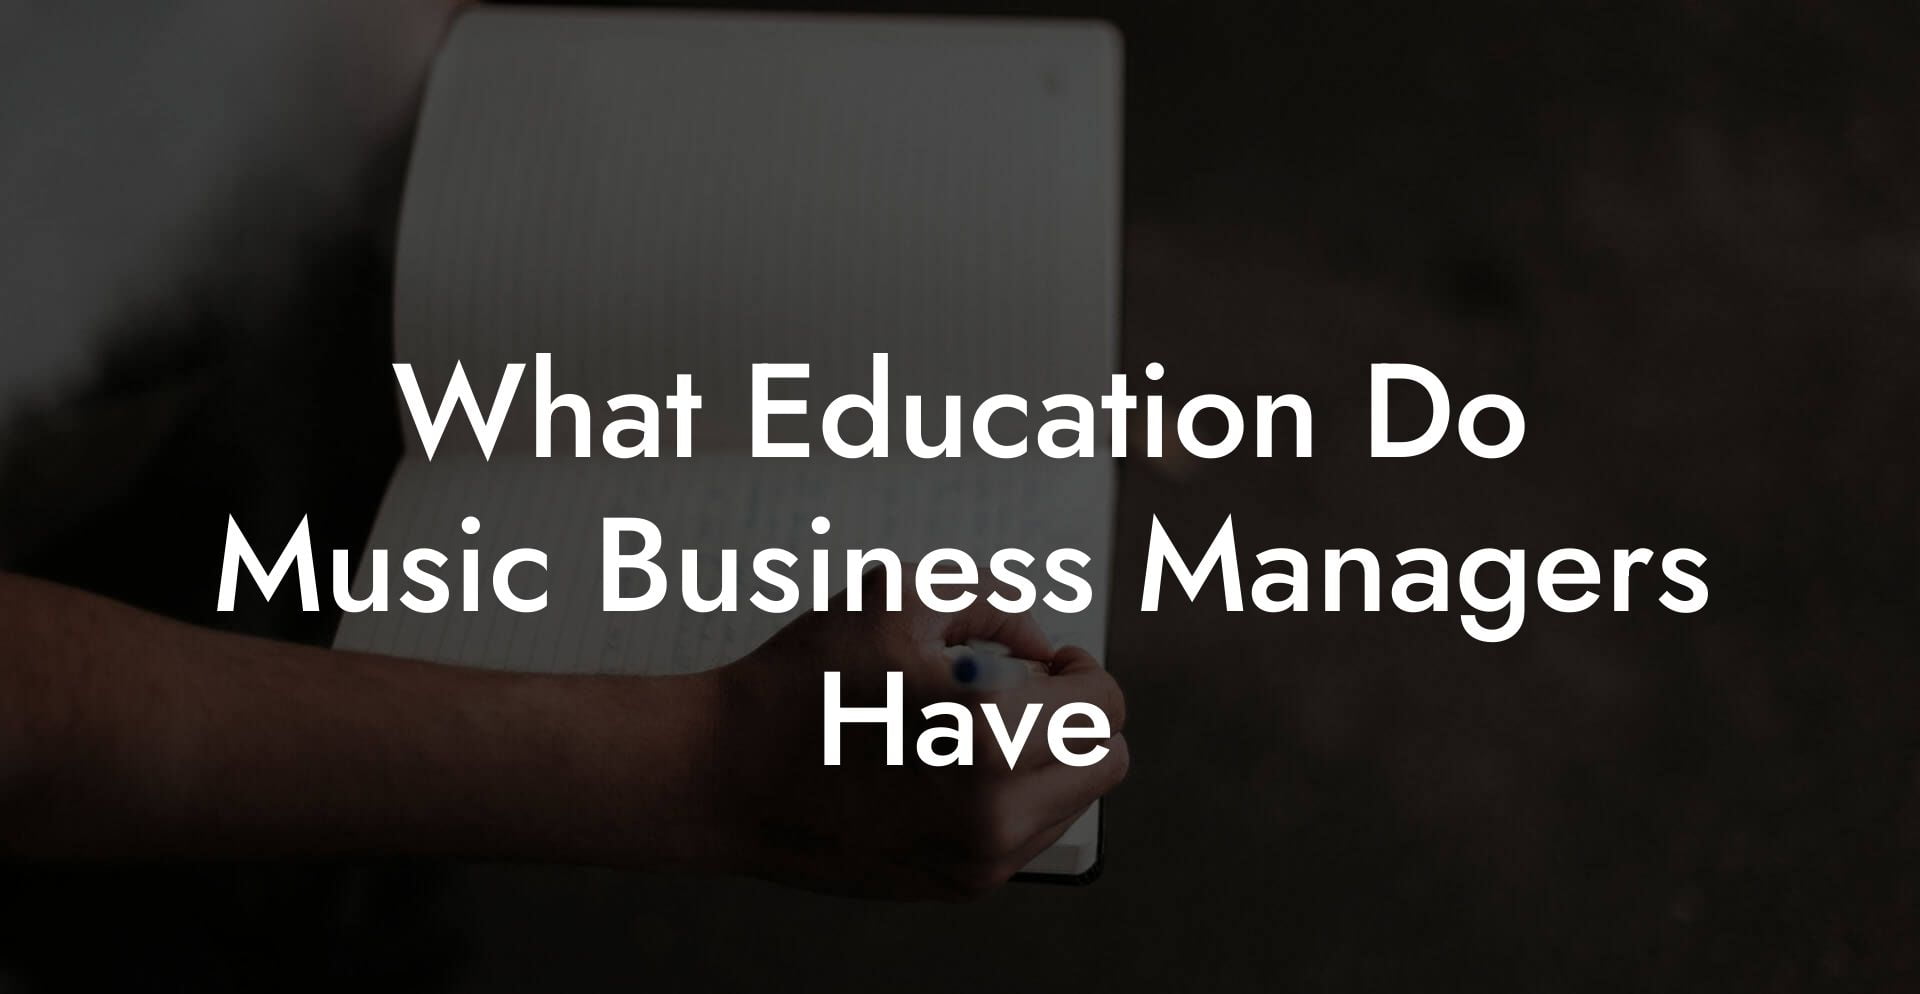 What Education Do Music Business Managers Have